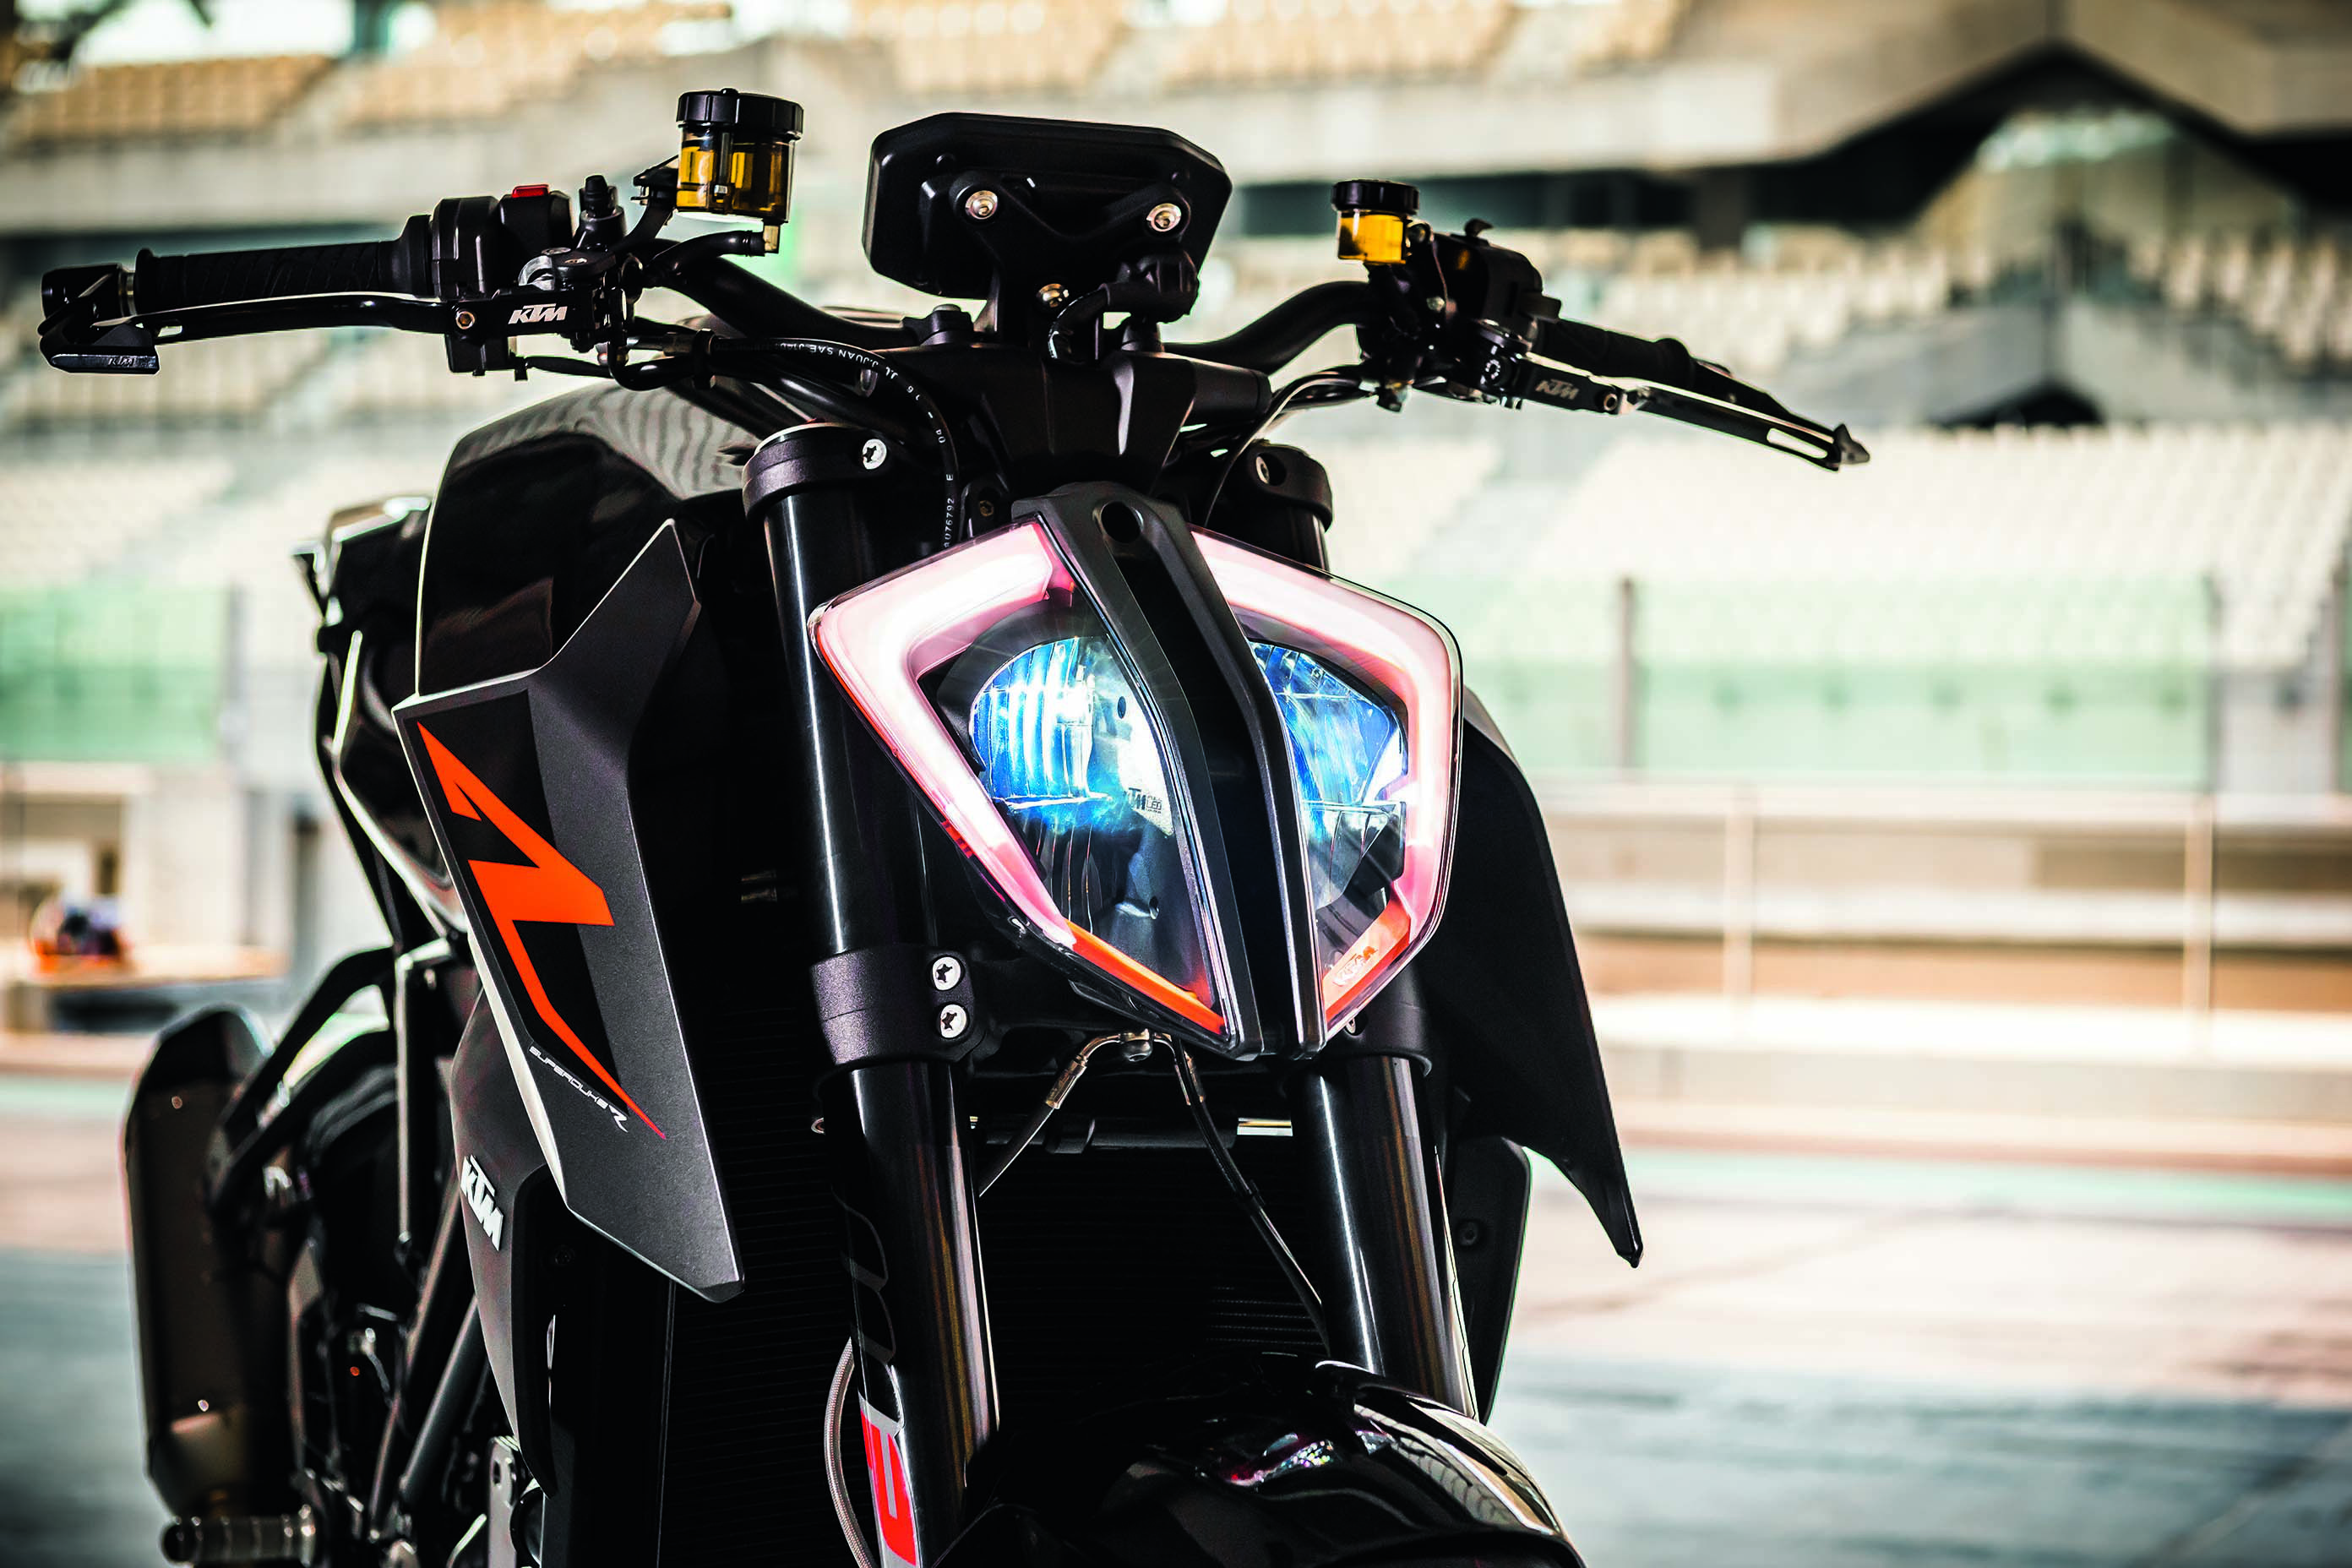 KTM 1290 Super Duke Front View, HD Bikes, 4k Wallpaper, Image, Background, Photo and Picture